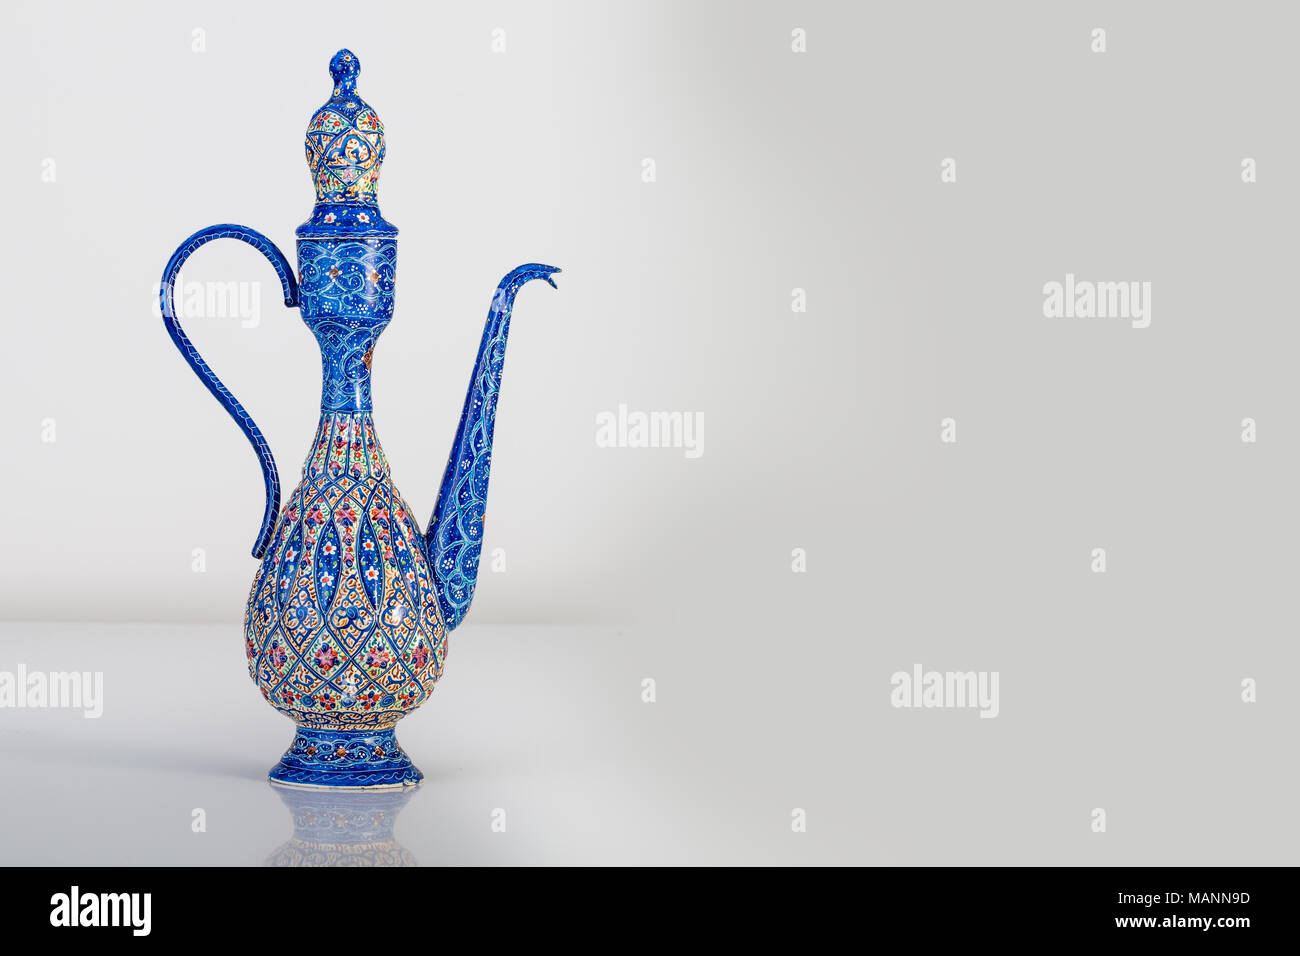 Persian Rosewater Bottle Container With Enameling  (Minakari) Design handcrafted With Azure Blue Colors And Ornaments Patterns On The Surface Of Metal Stock Photo